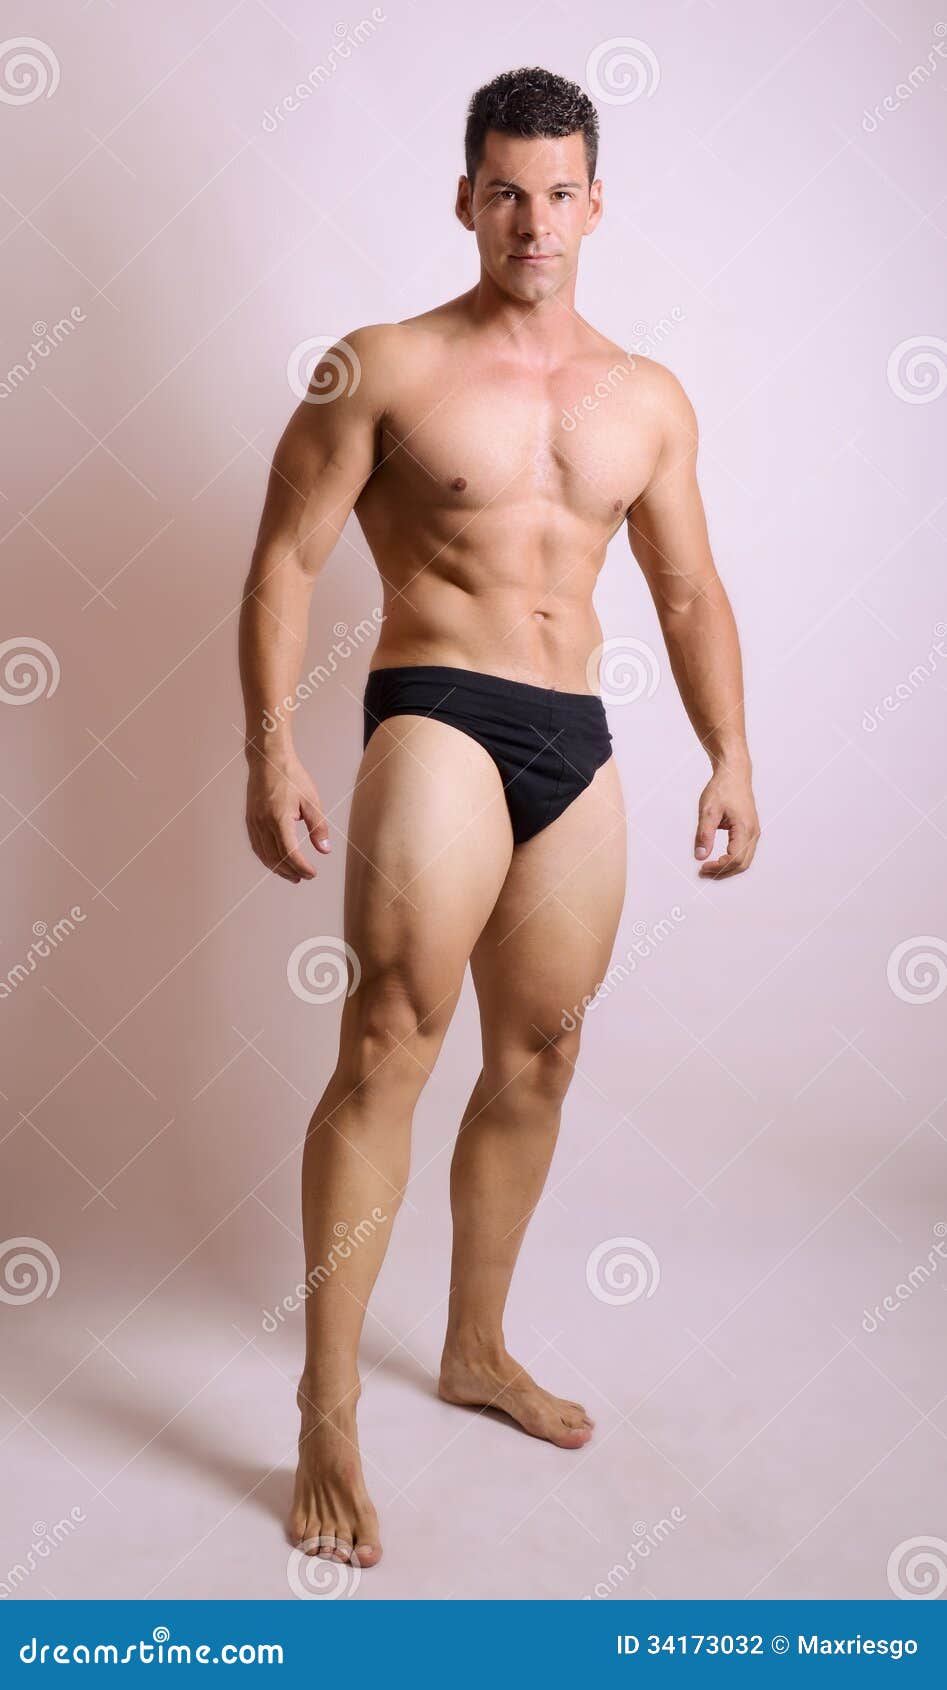 Strong guy in underwear stock photo. Image of portrait - 34173032